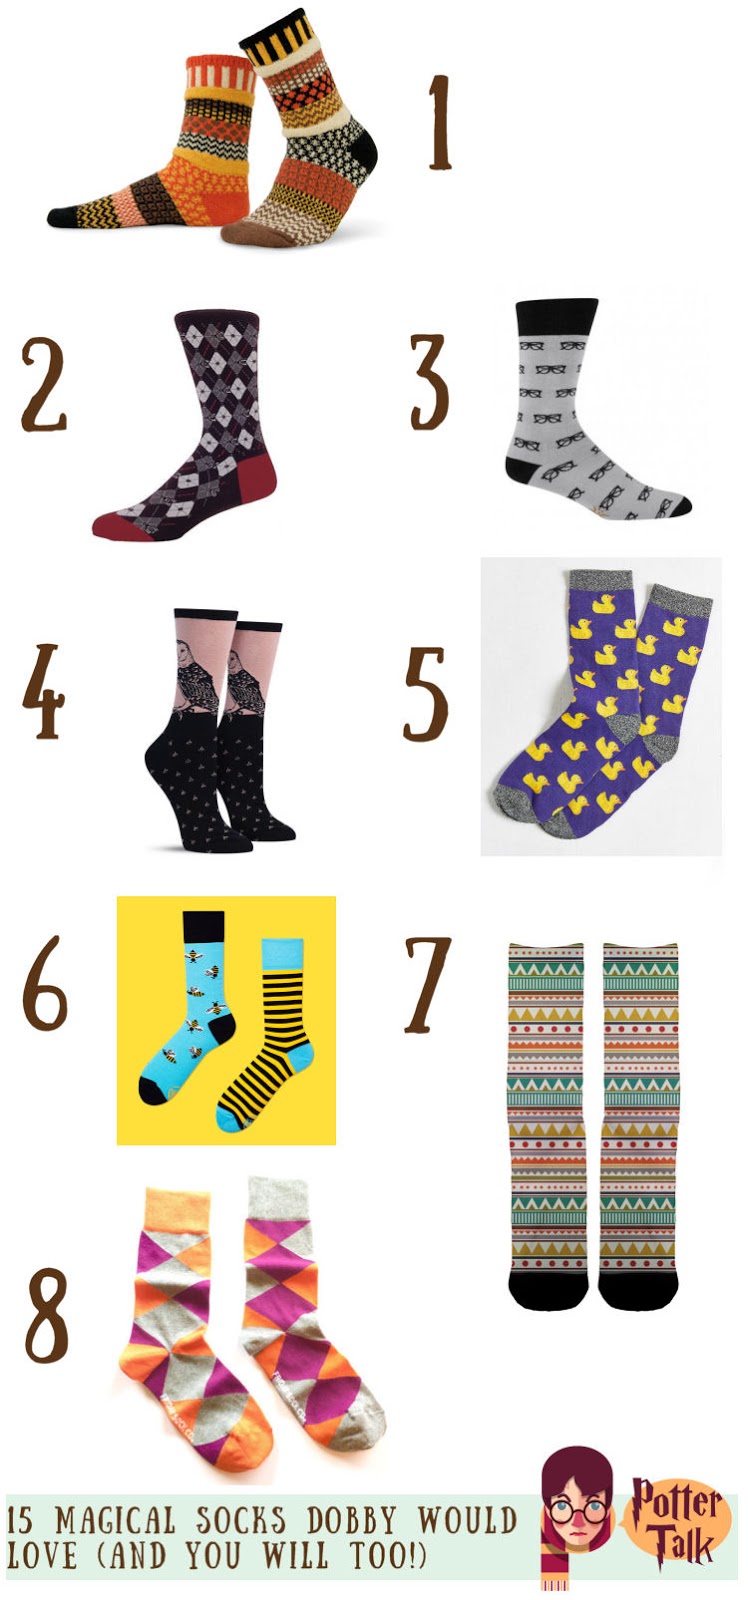 15 Magical Socks Dobby Would Love (and you will too!)